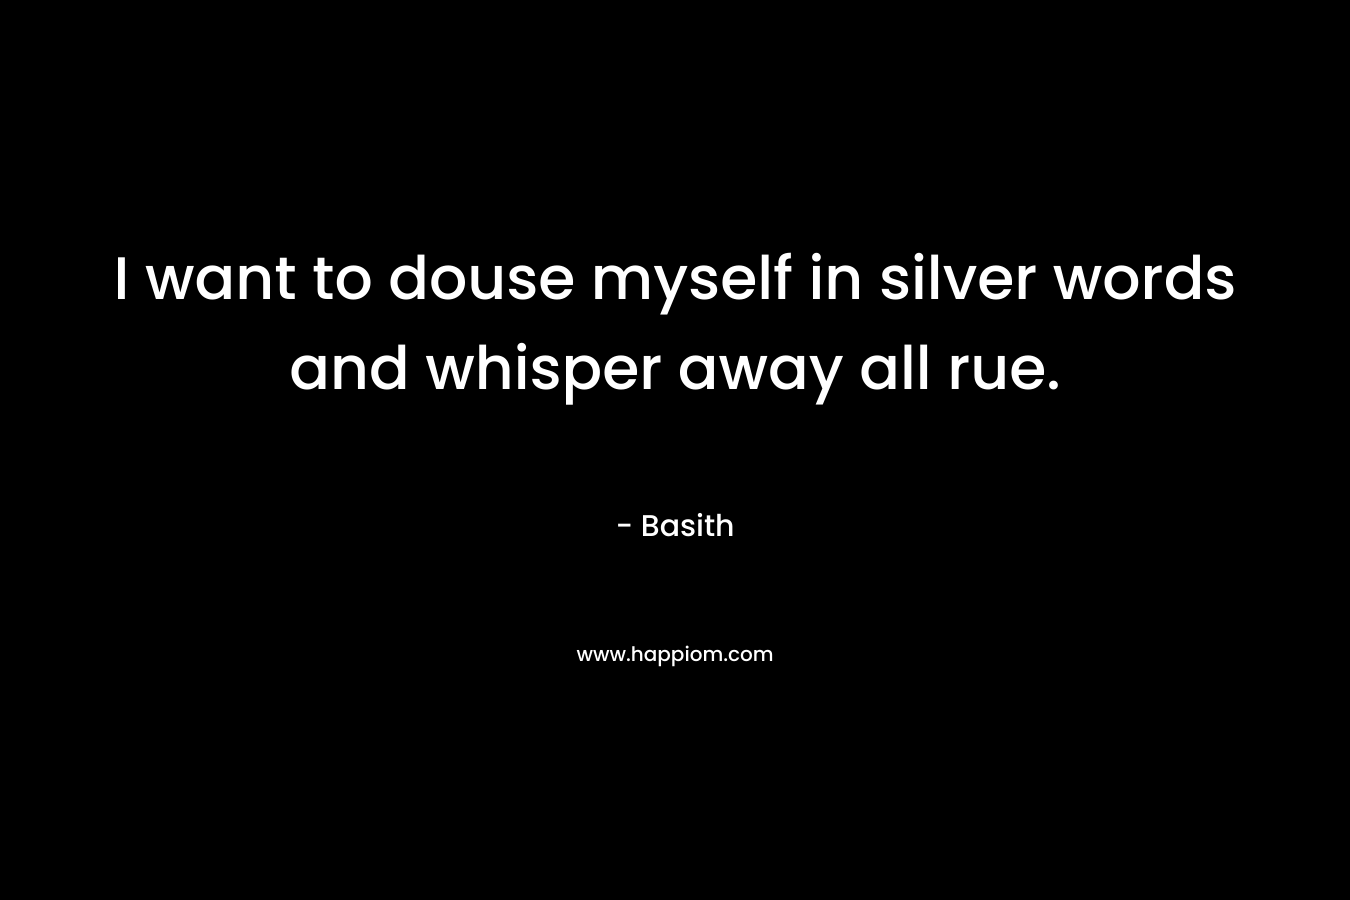 I want to douse myself in silver words and whisper away all rue.